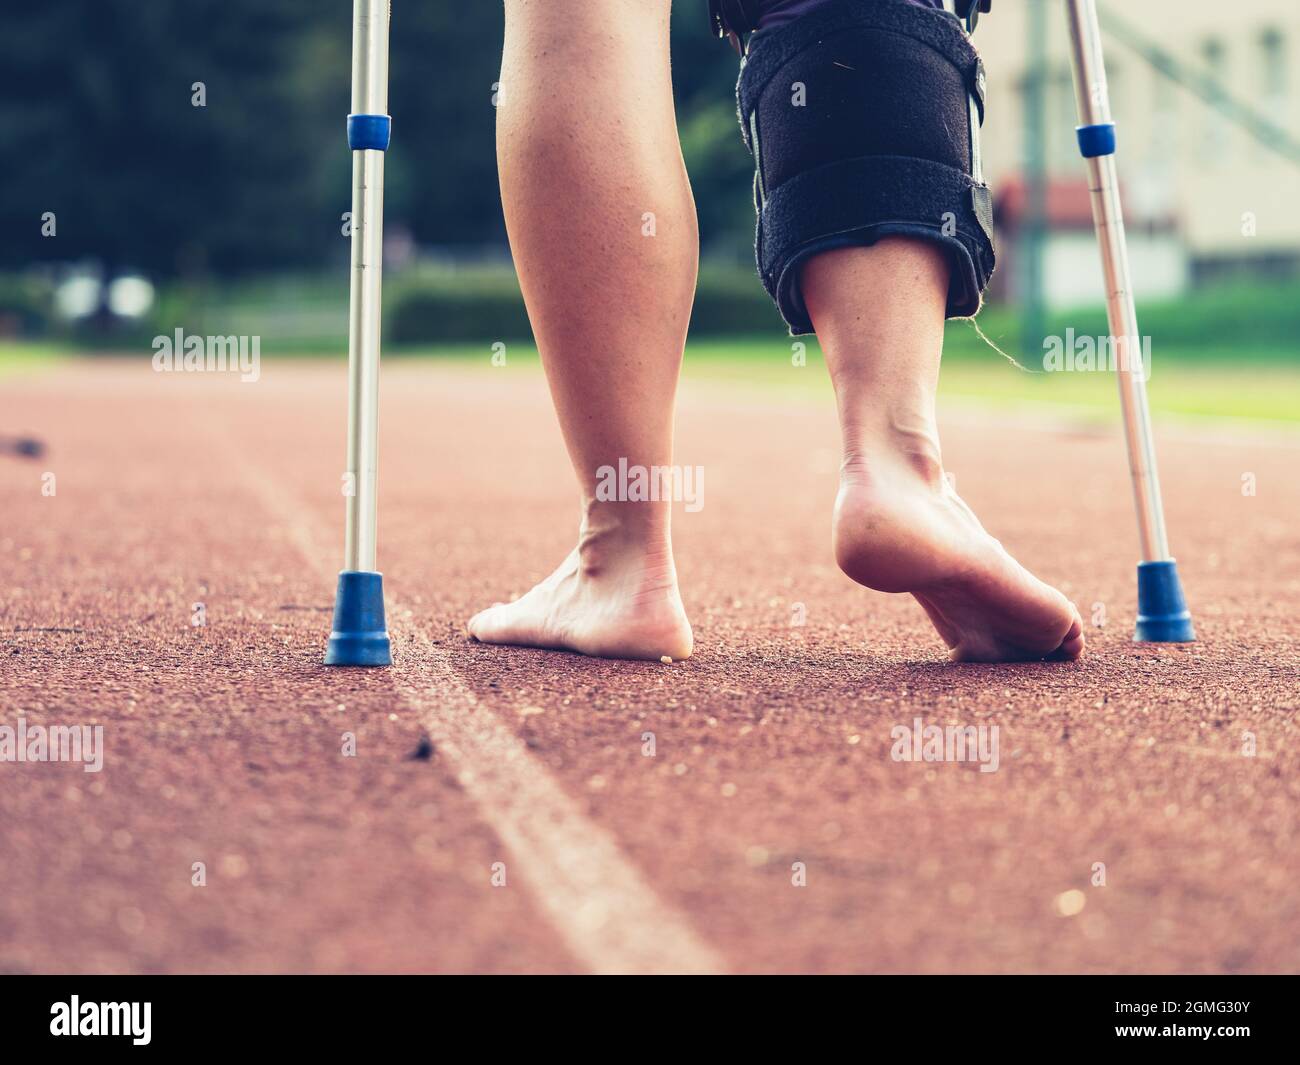 Woman athlete on crutches, wearing a wrist brace and knee support, bandaged leg.  Woman walks on red running surface Stock Photo